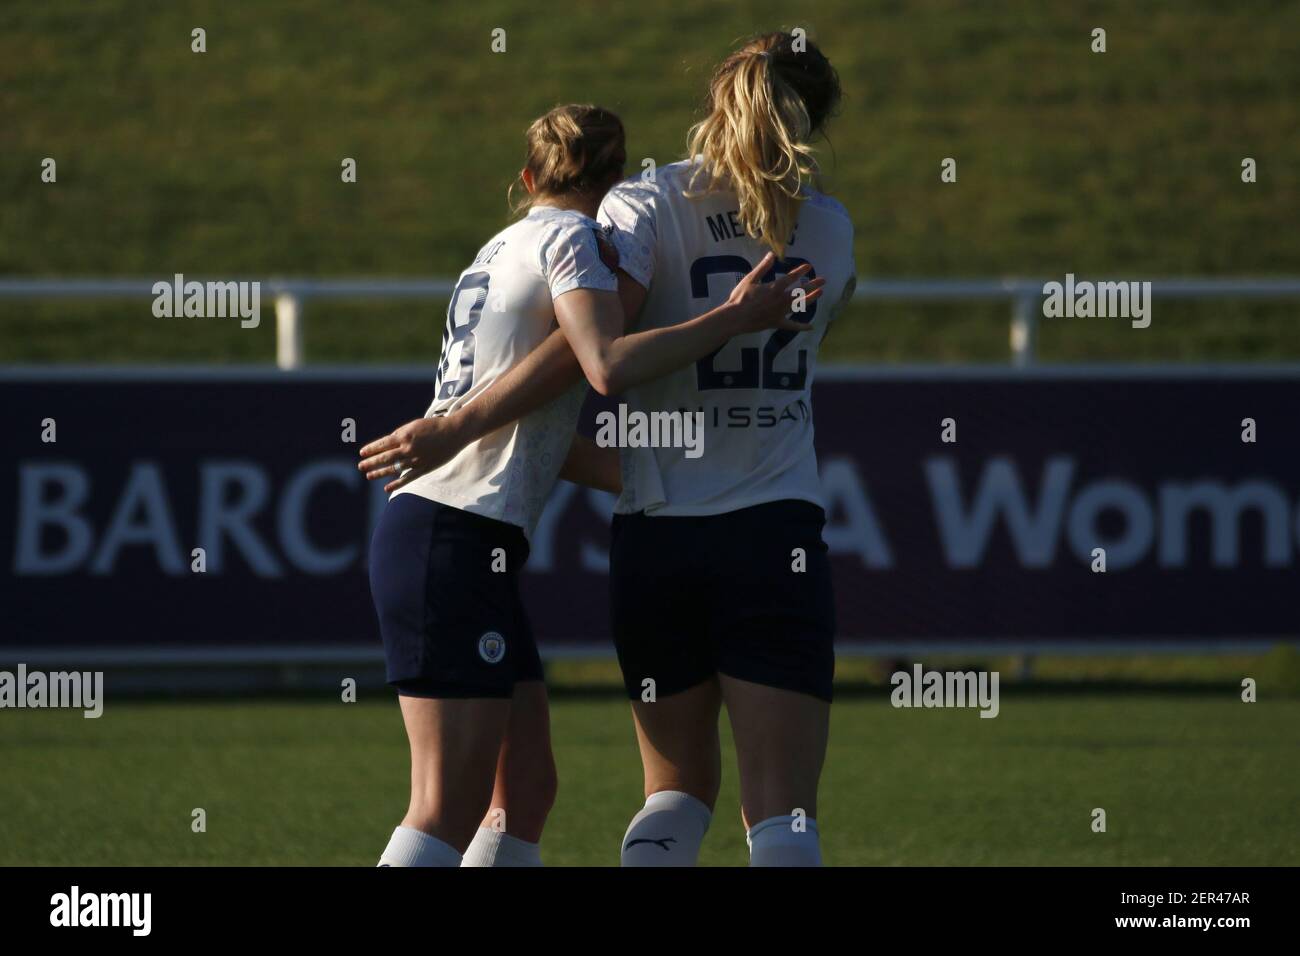 Burton Upon Trent, UK. 28th Feb, 2021. Ellen White (#18 Manchester City)  and Sam Mewis (#22 Manchester City) celebrate their sides first goal in the  Barclays FA Women's Super League game between